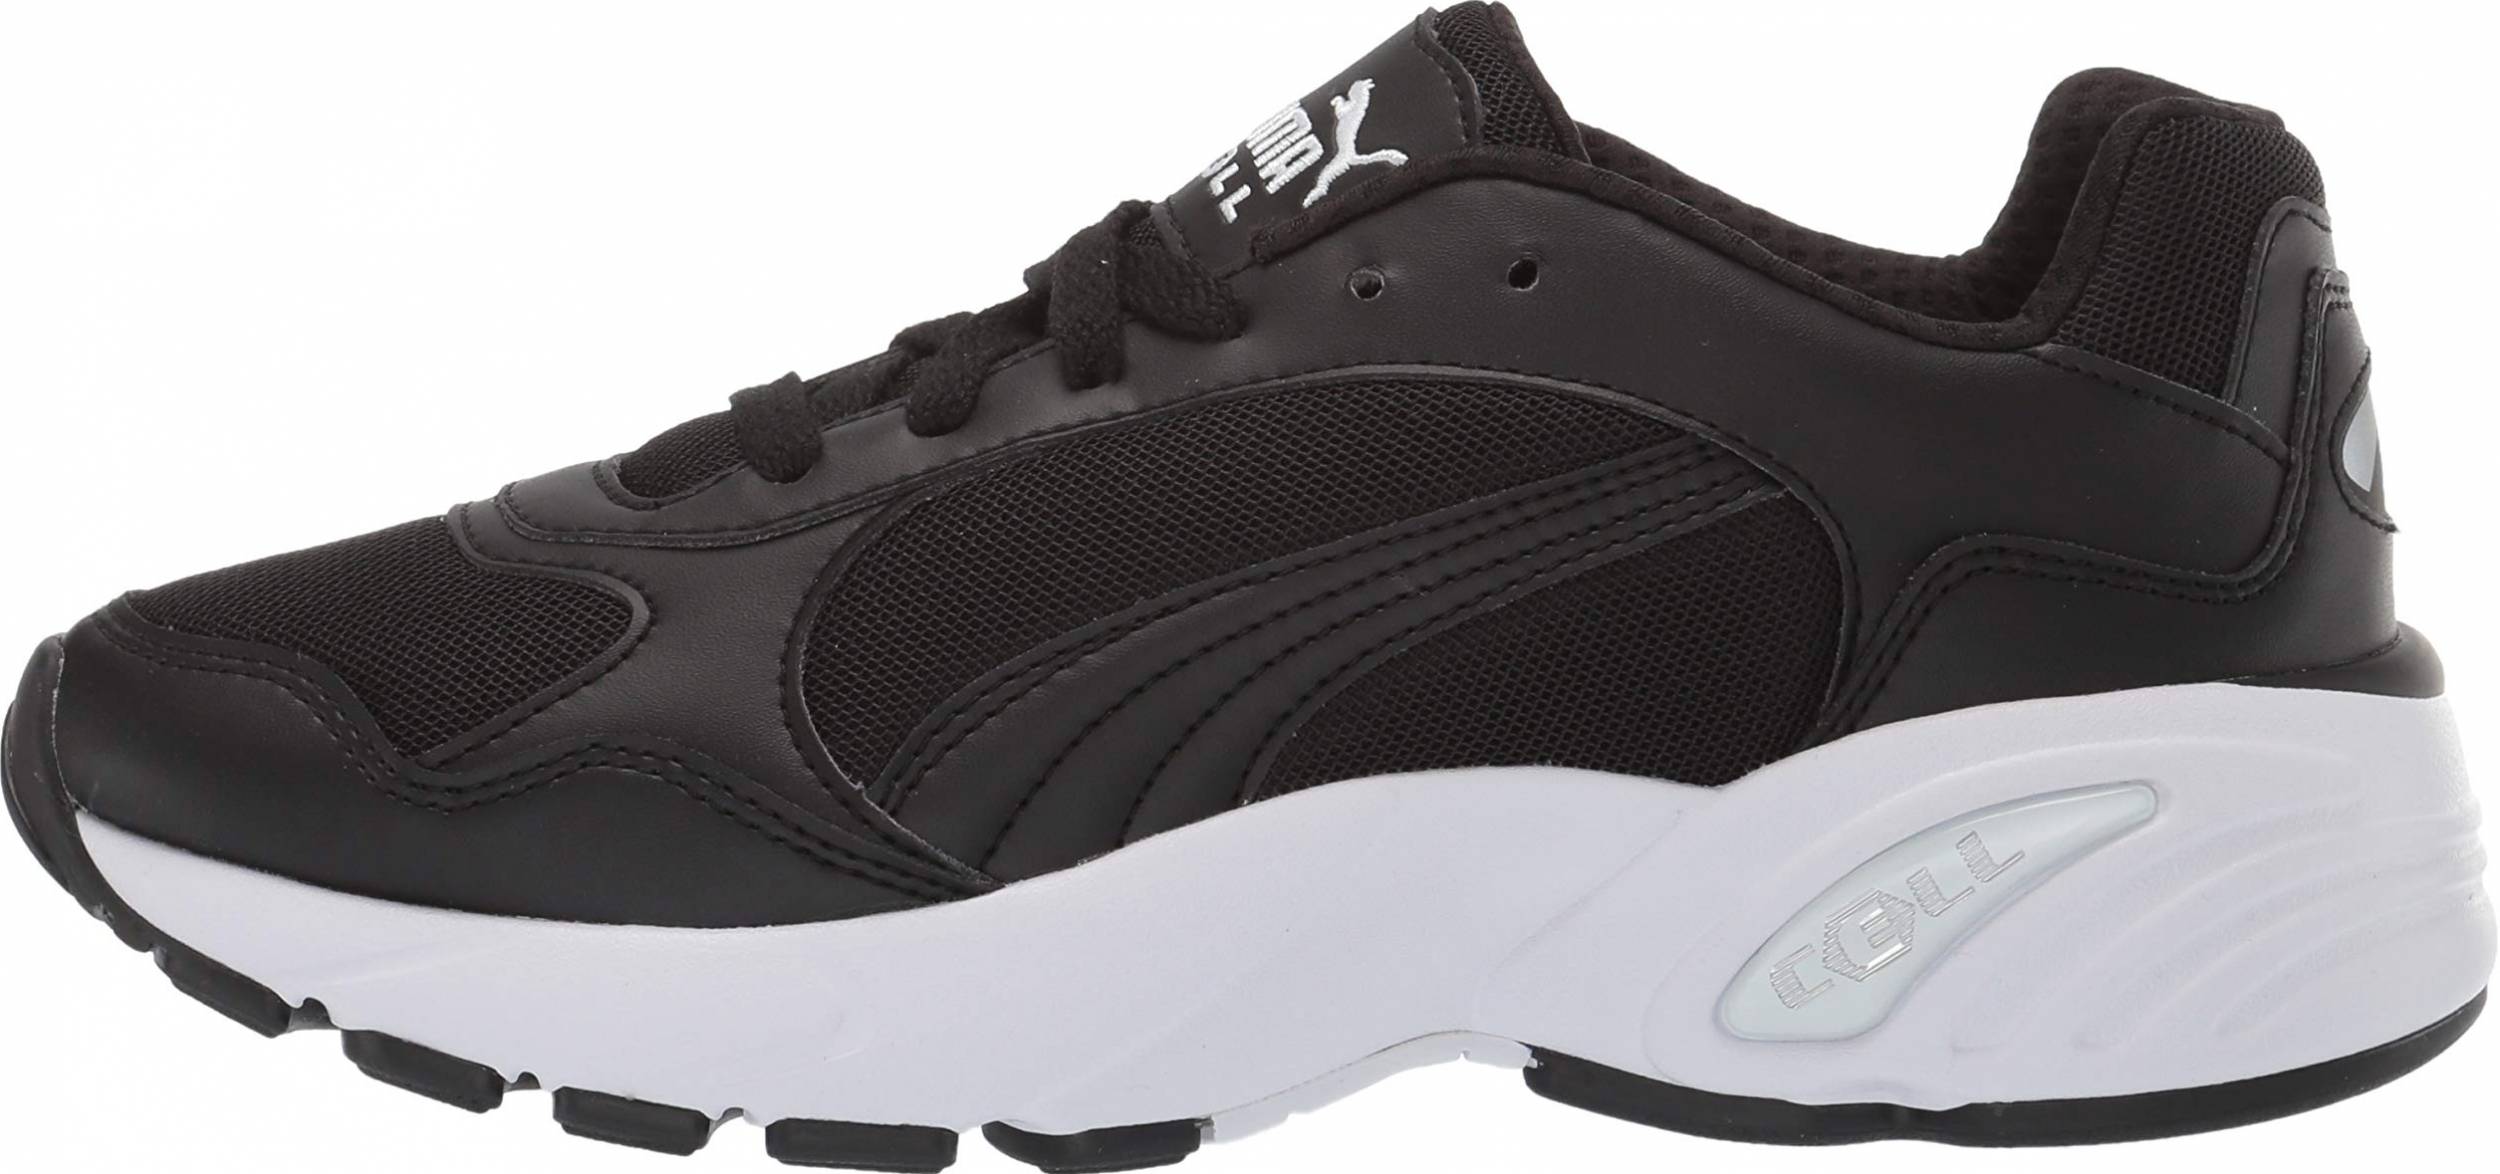 Only $23 + Review of Puma CELL Viper 